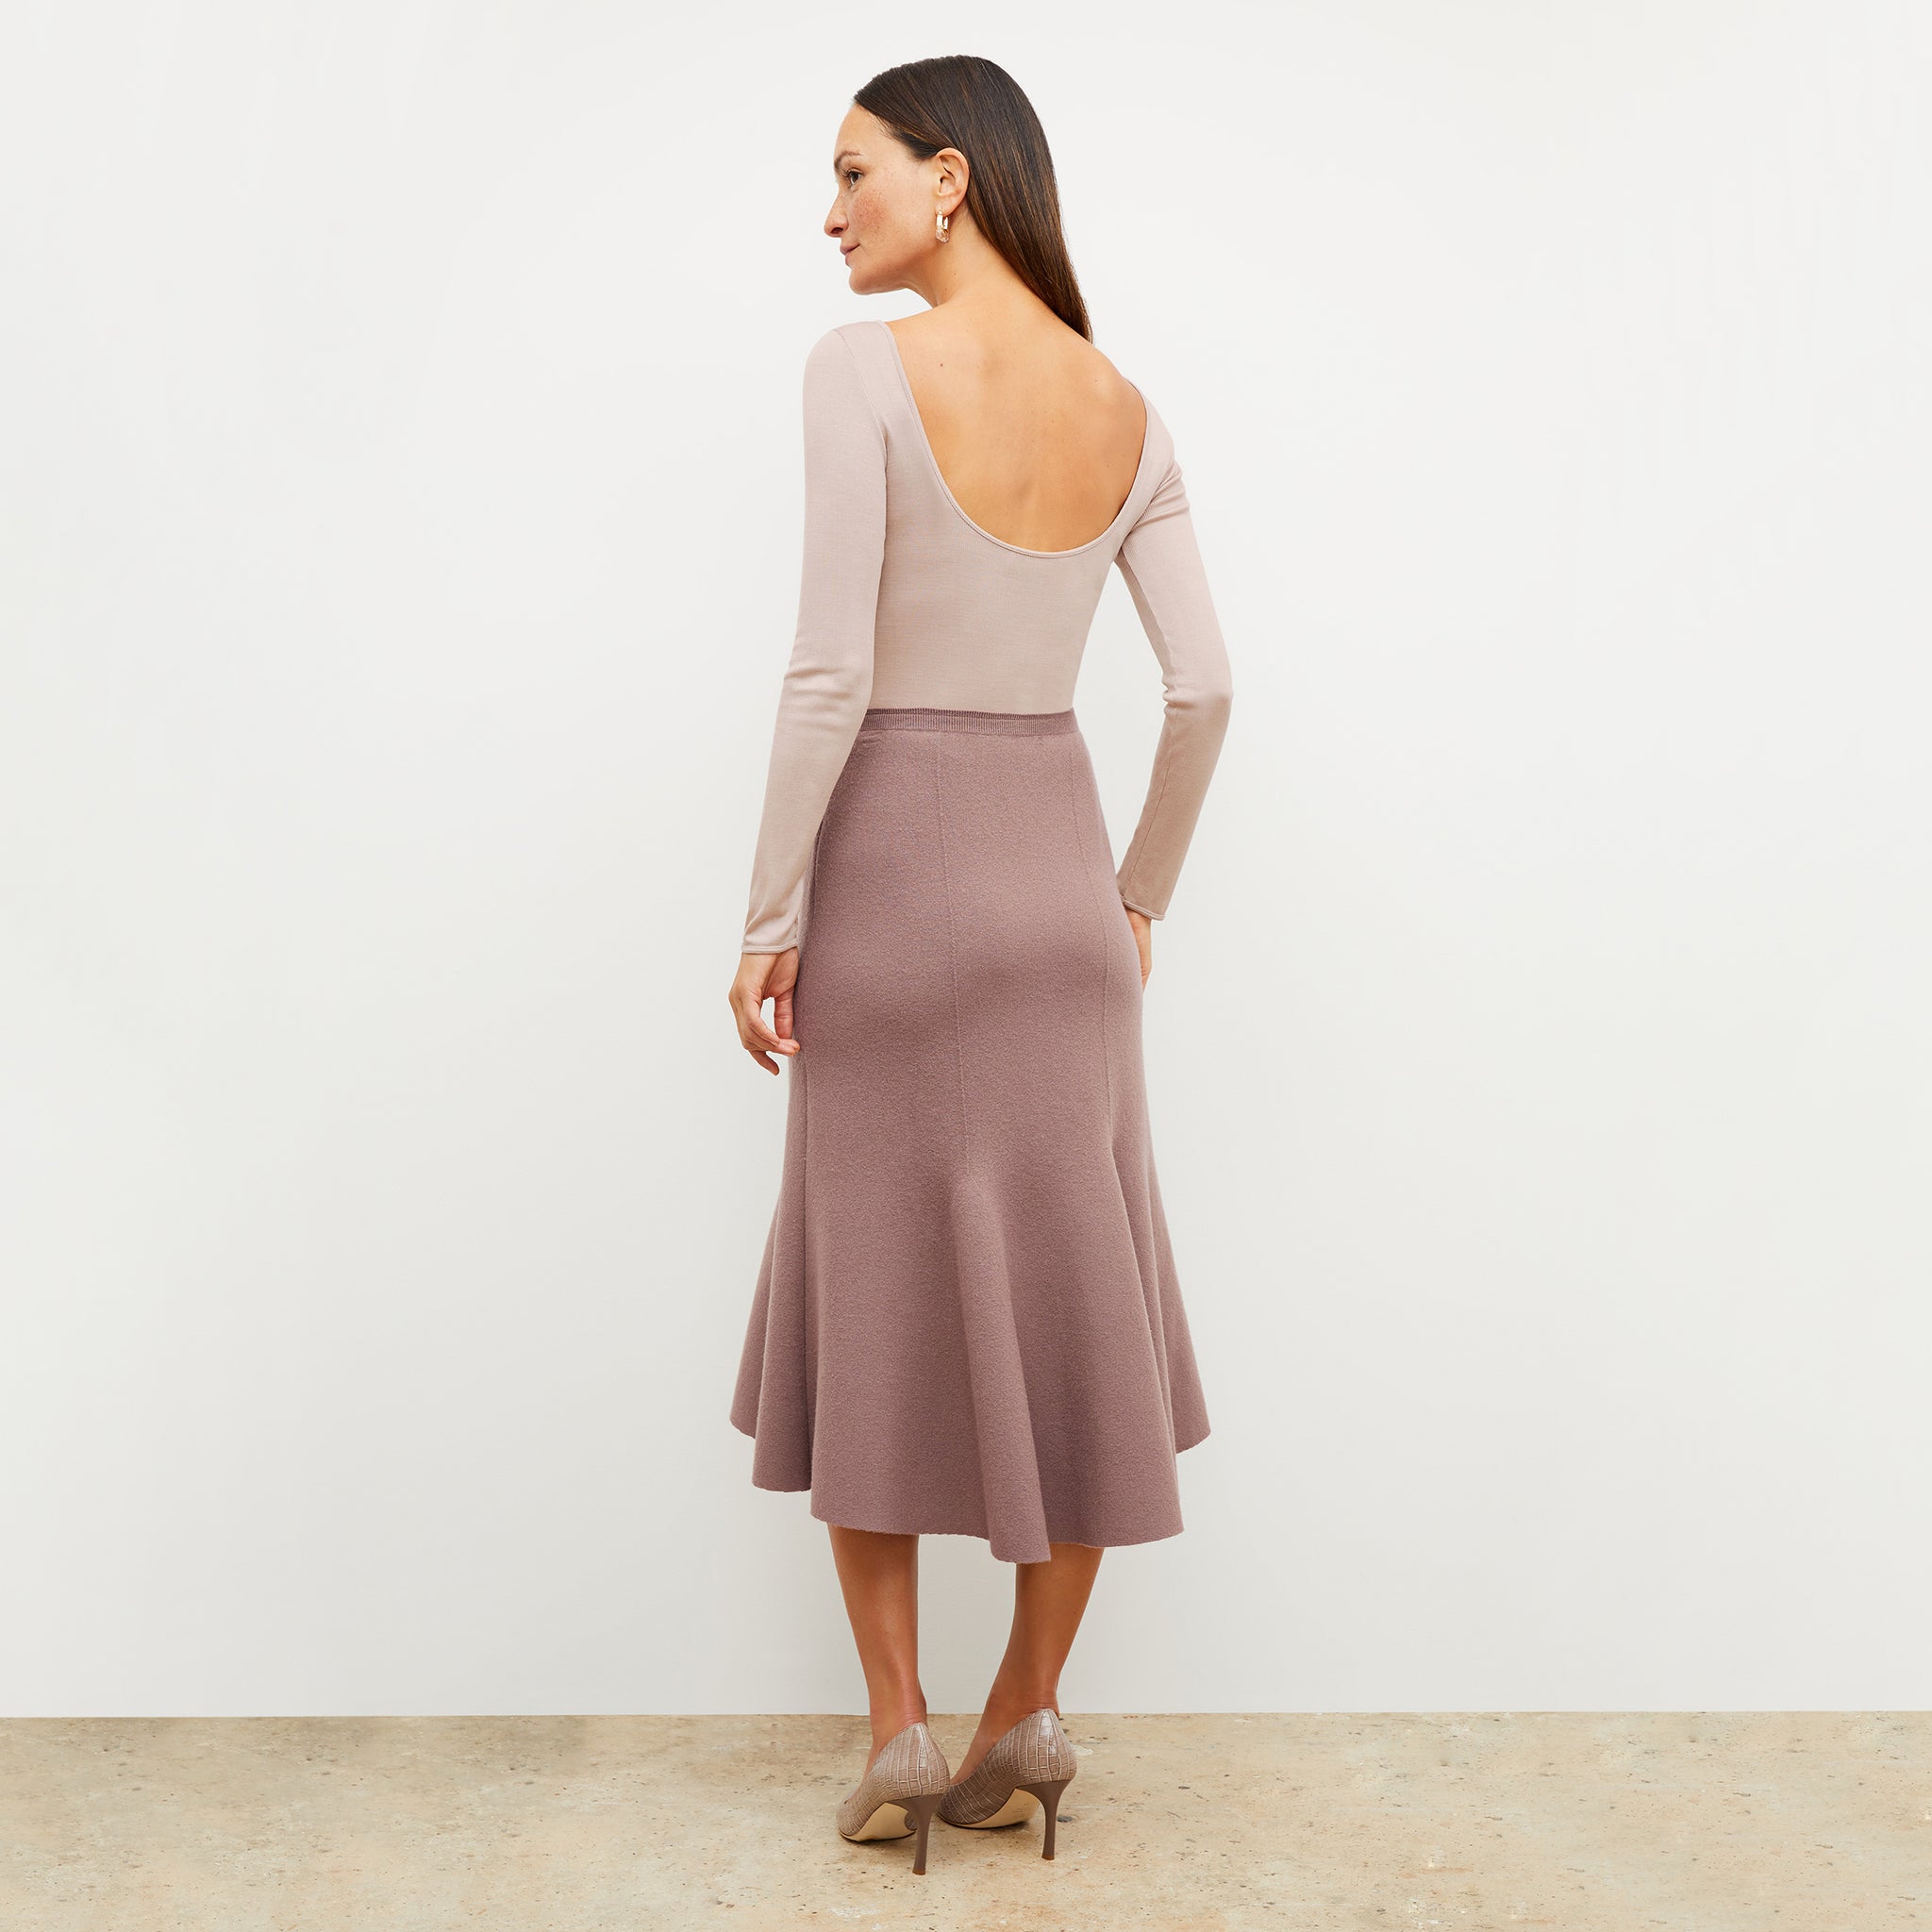 Back image of a woman wearing the leah skirt in rose taupe 